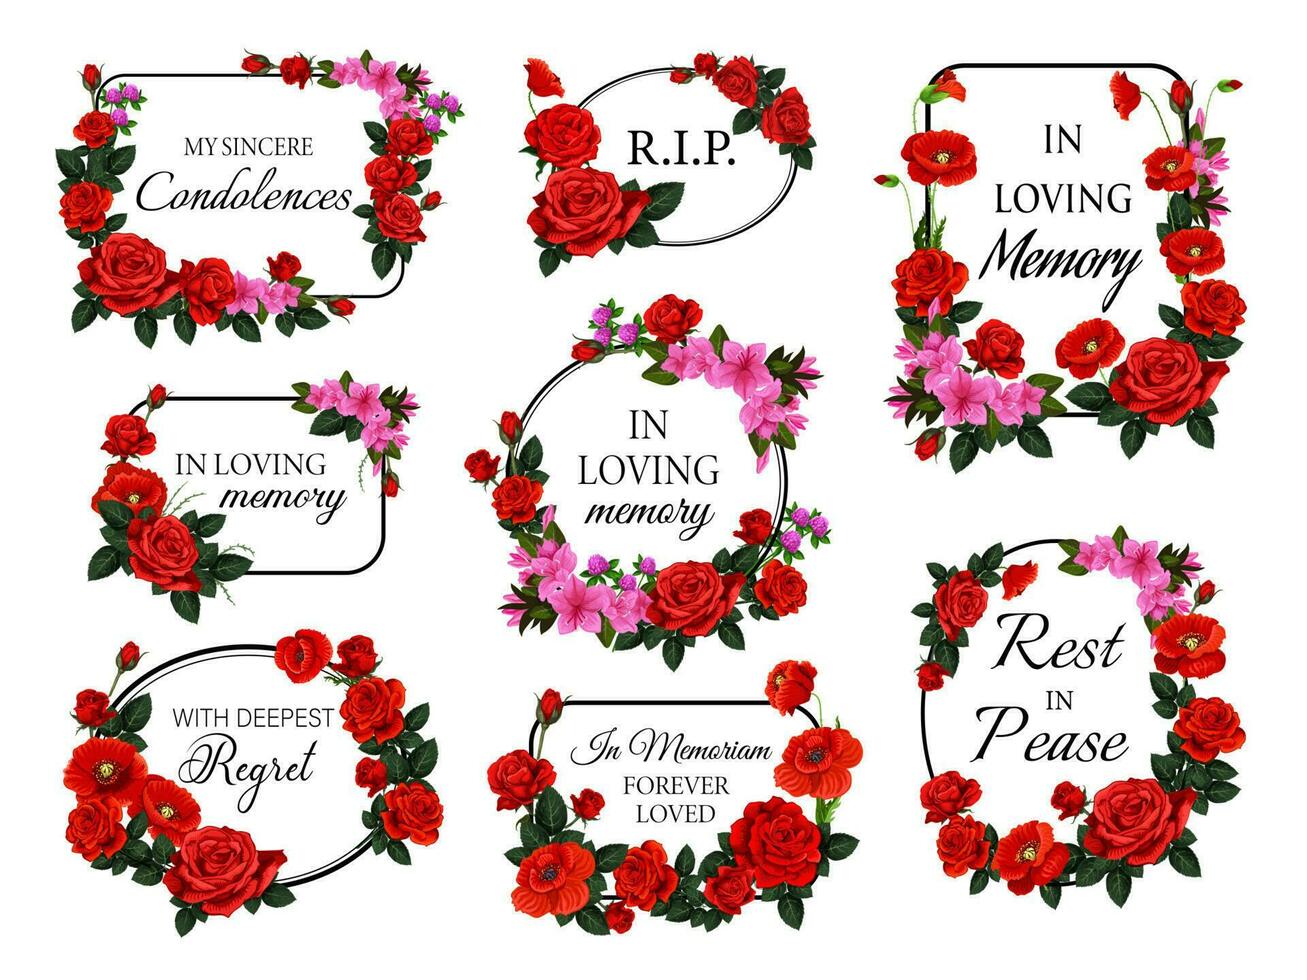 Funerary frames round, square borders with flowers vector